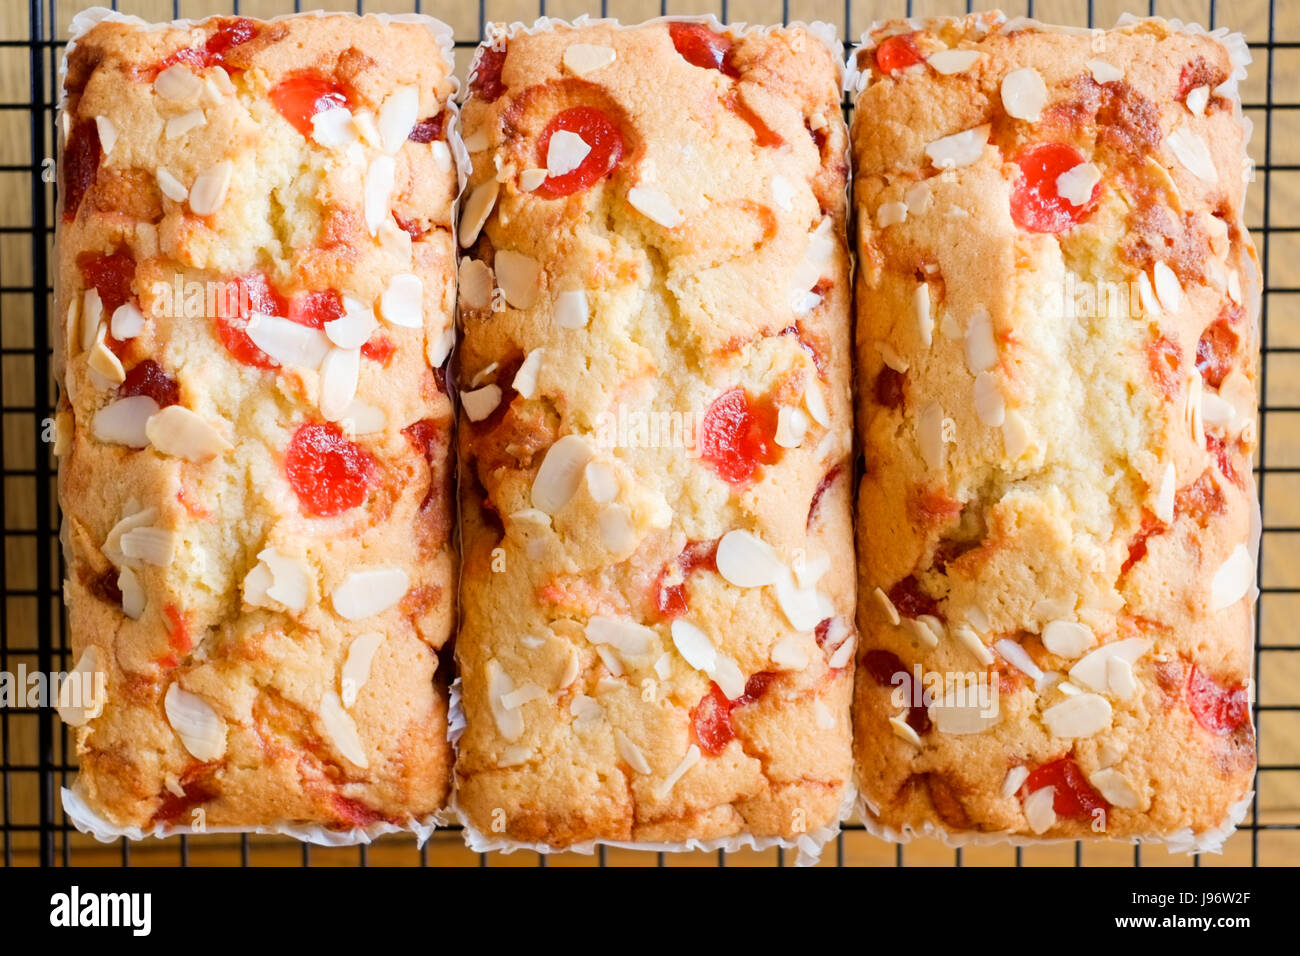 Home cooked food. Three cherry and almond cakes on a cooling rack. Stock Photo